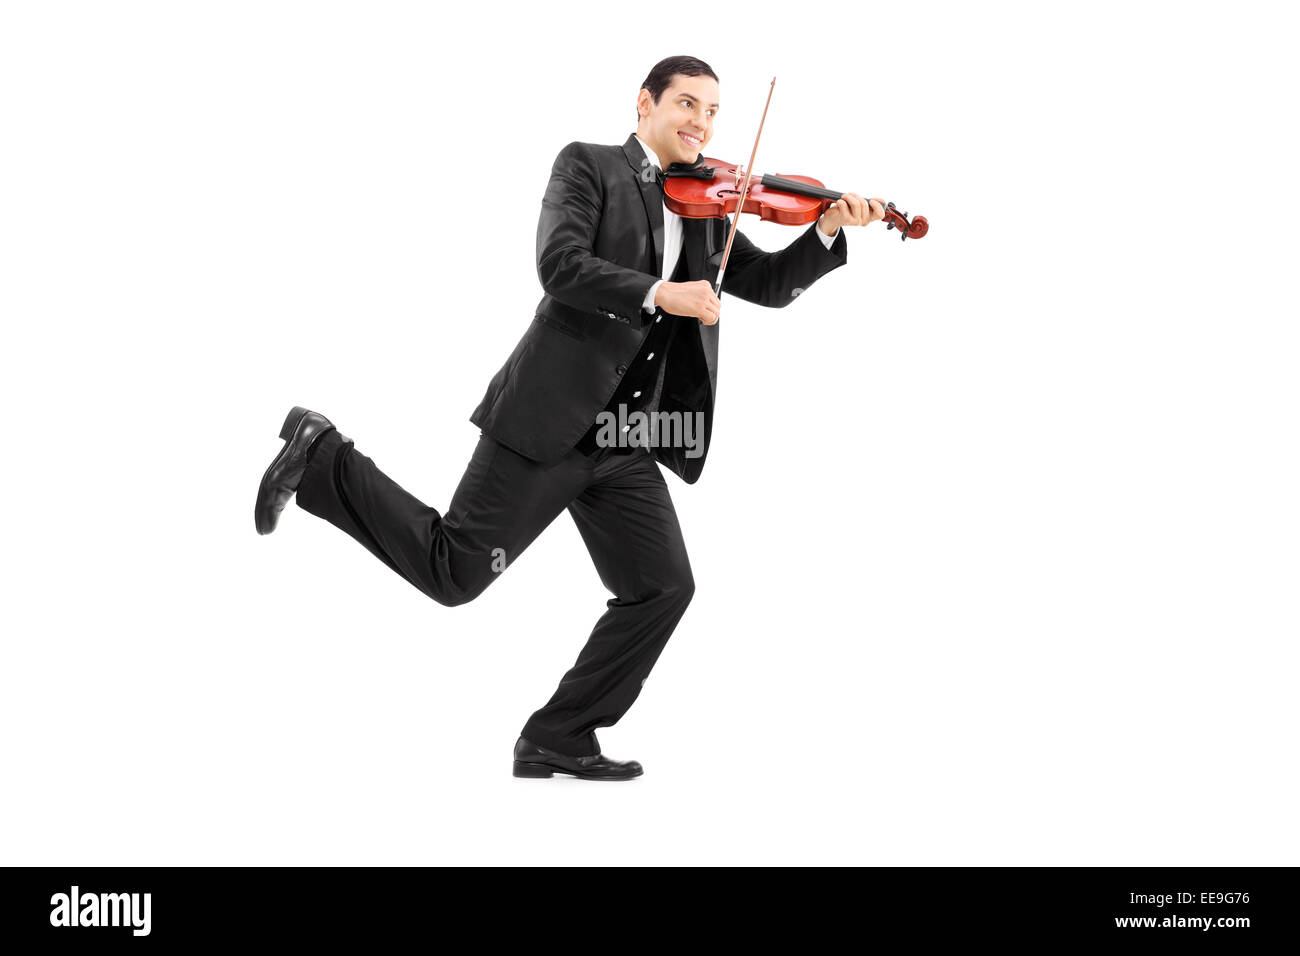 Full length portrait of a man running and playing a violin isolated on white background Stock Photo